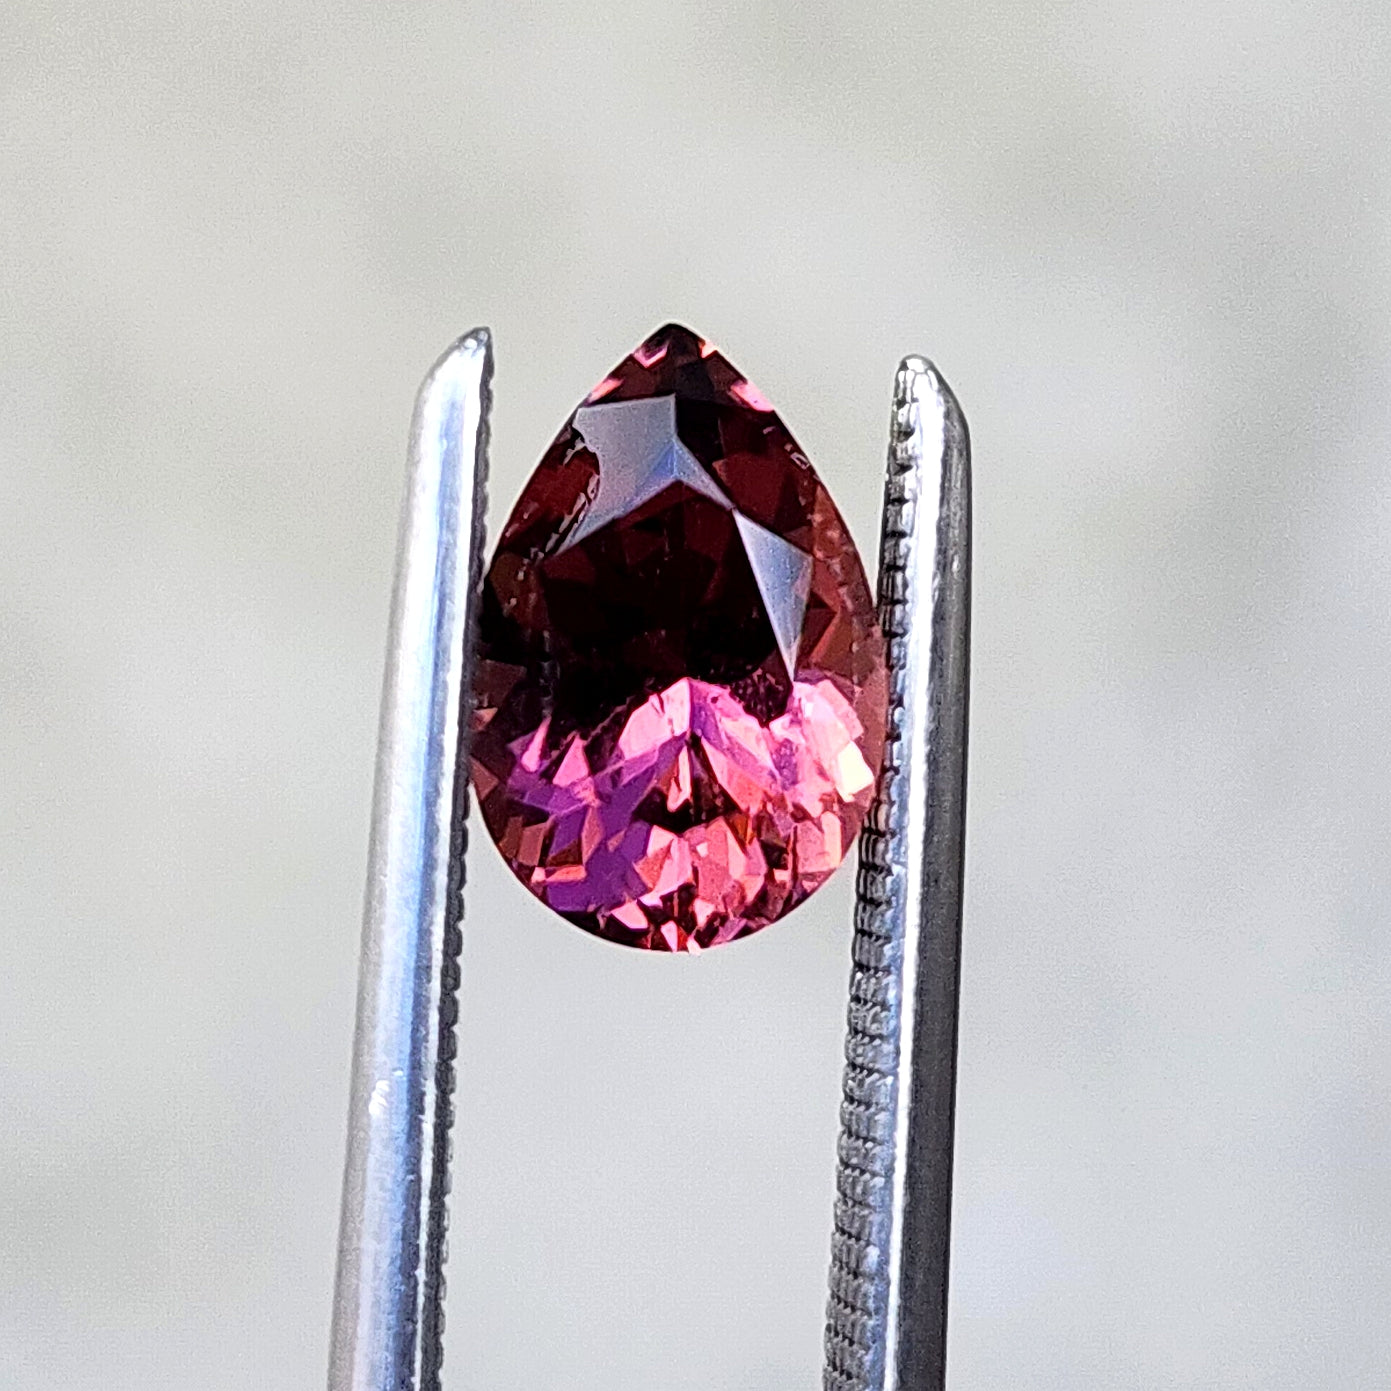 .78ct Natural Rubellite Tourmaline - Pink with Purple Spots